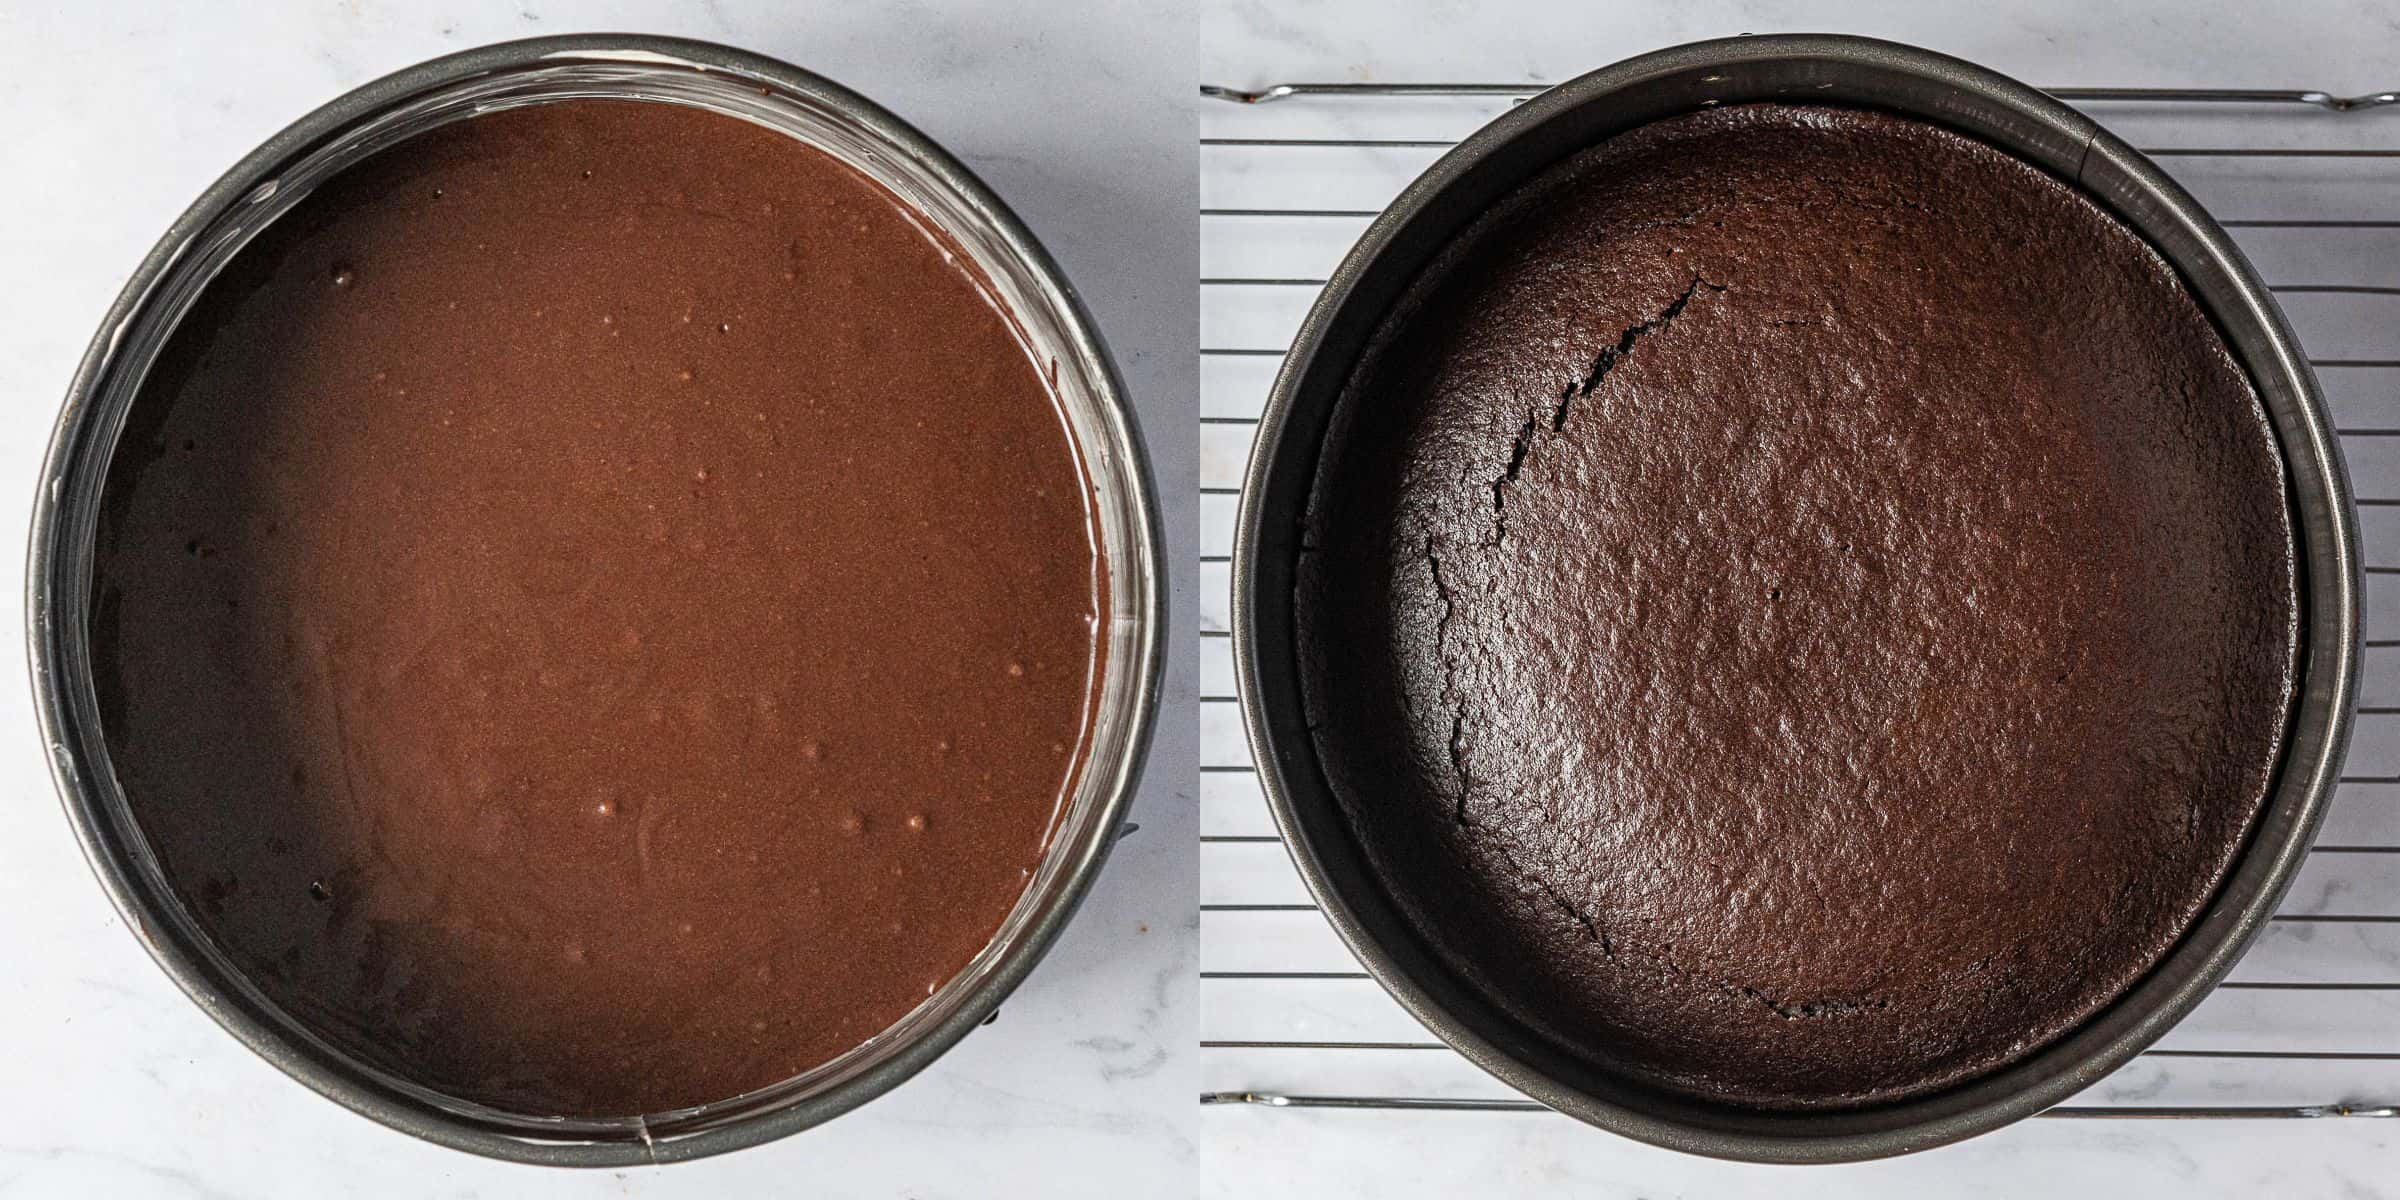 Step 2, a two image collage of the cake before and after baking.